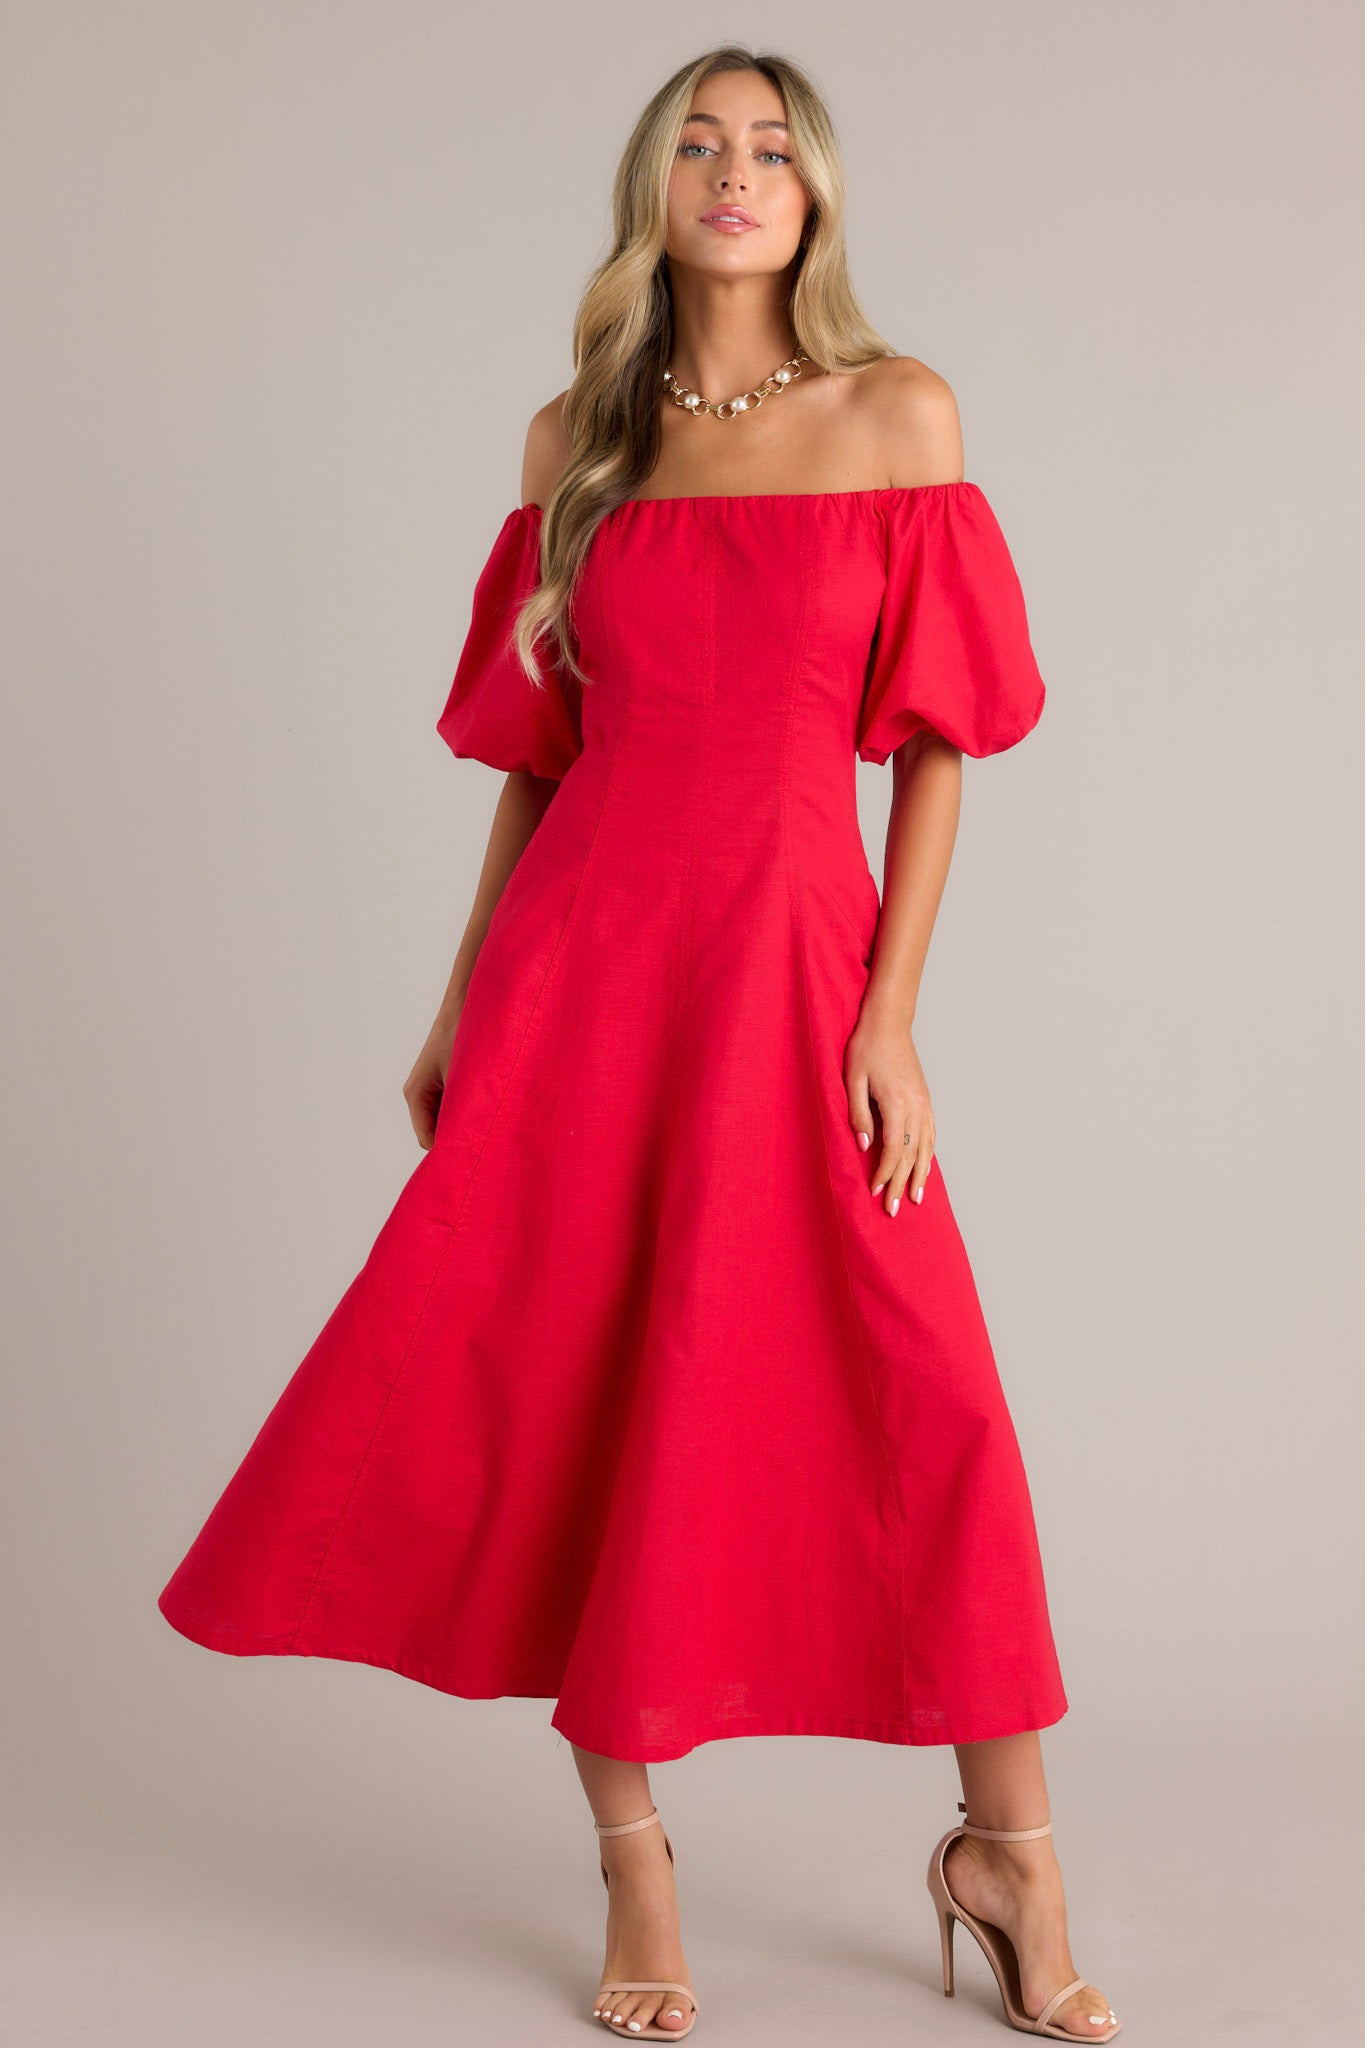 Front view of a stylish off-the-shoulder red dress with voluminous puffed sleeves, a fitted bodice, and a flowing ankle-length skirt, showcasing a fashionable and elegant design.